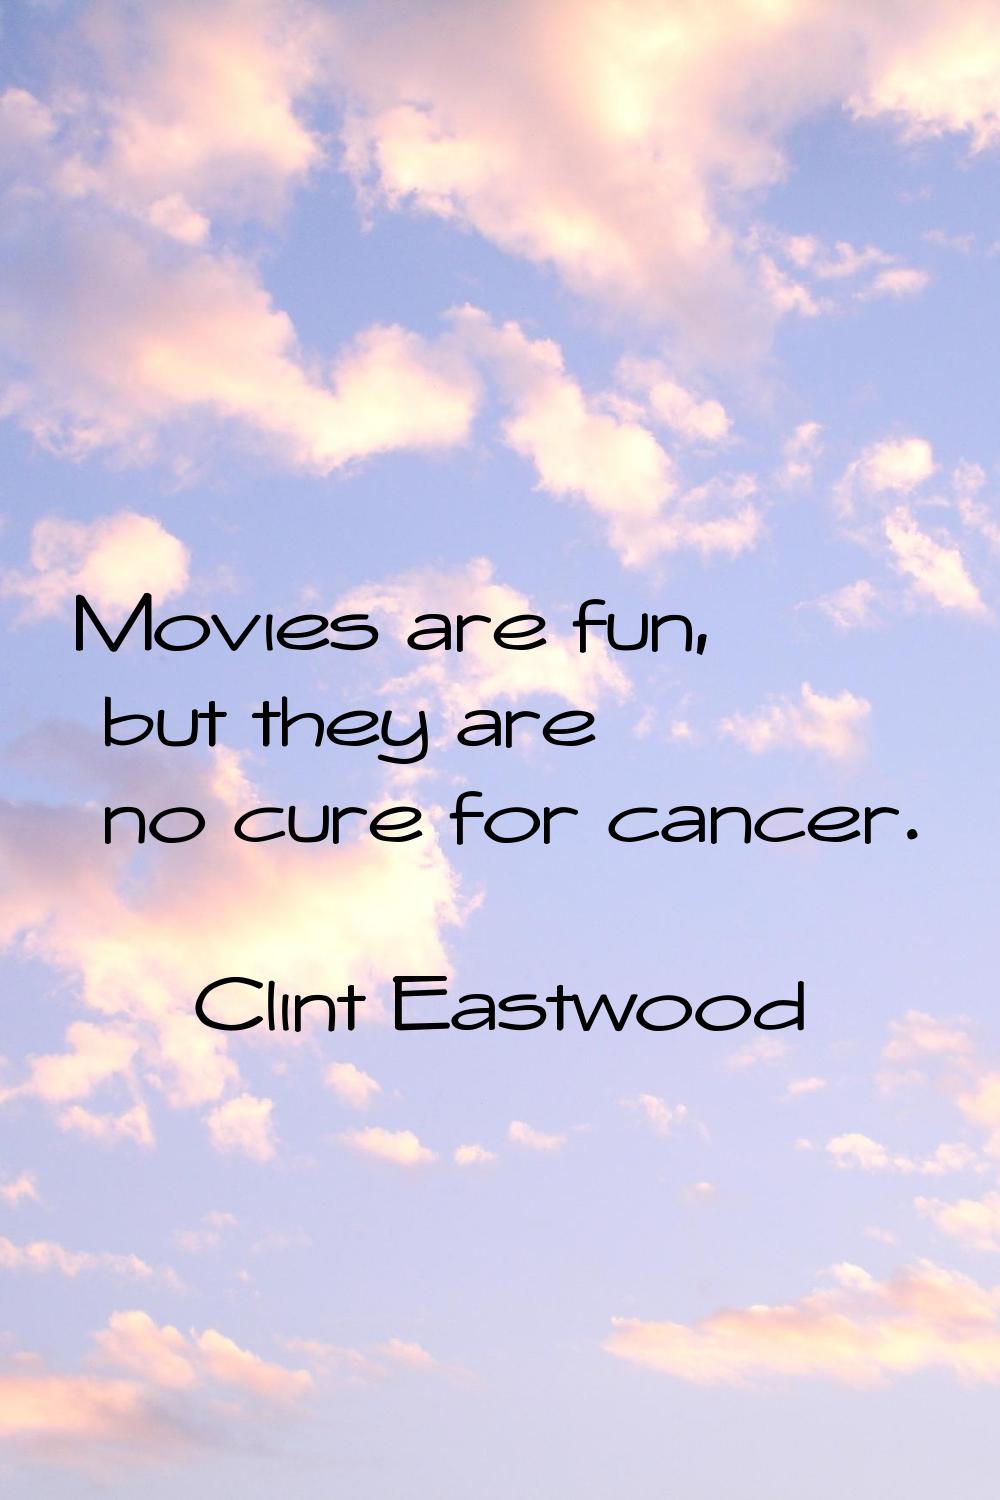 Movies are fun, but they are no cure for cancer.